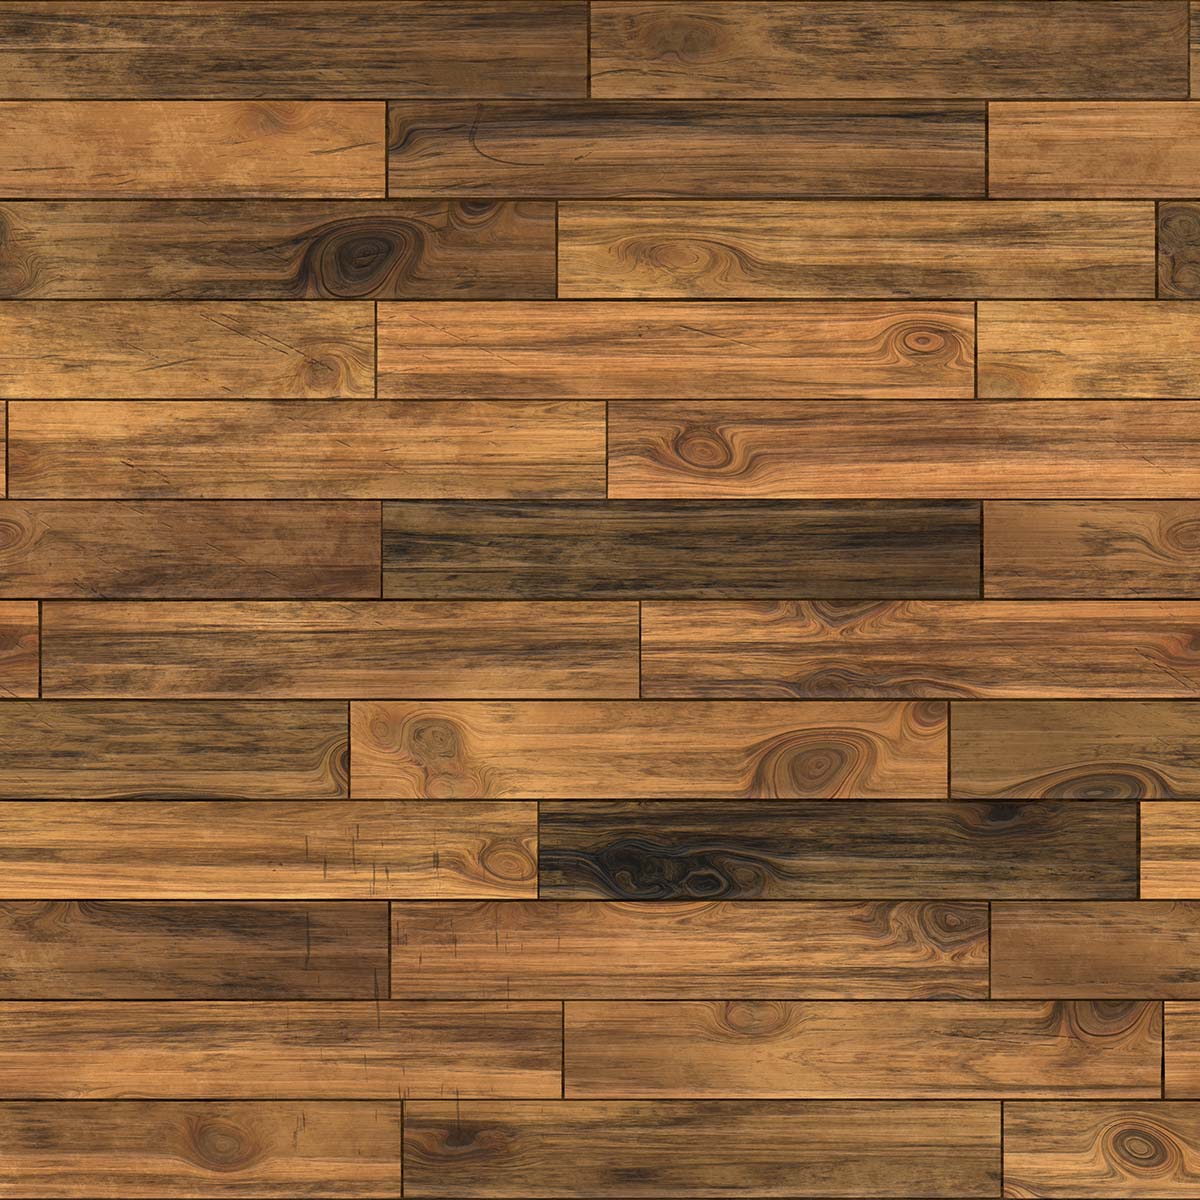 A wood floor with different colors